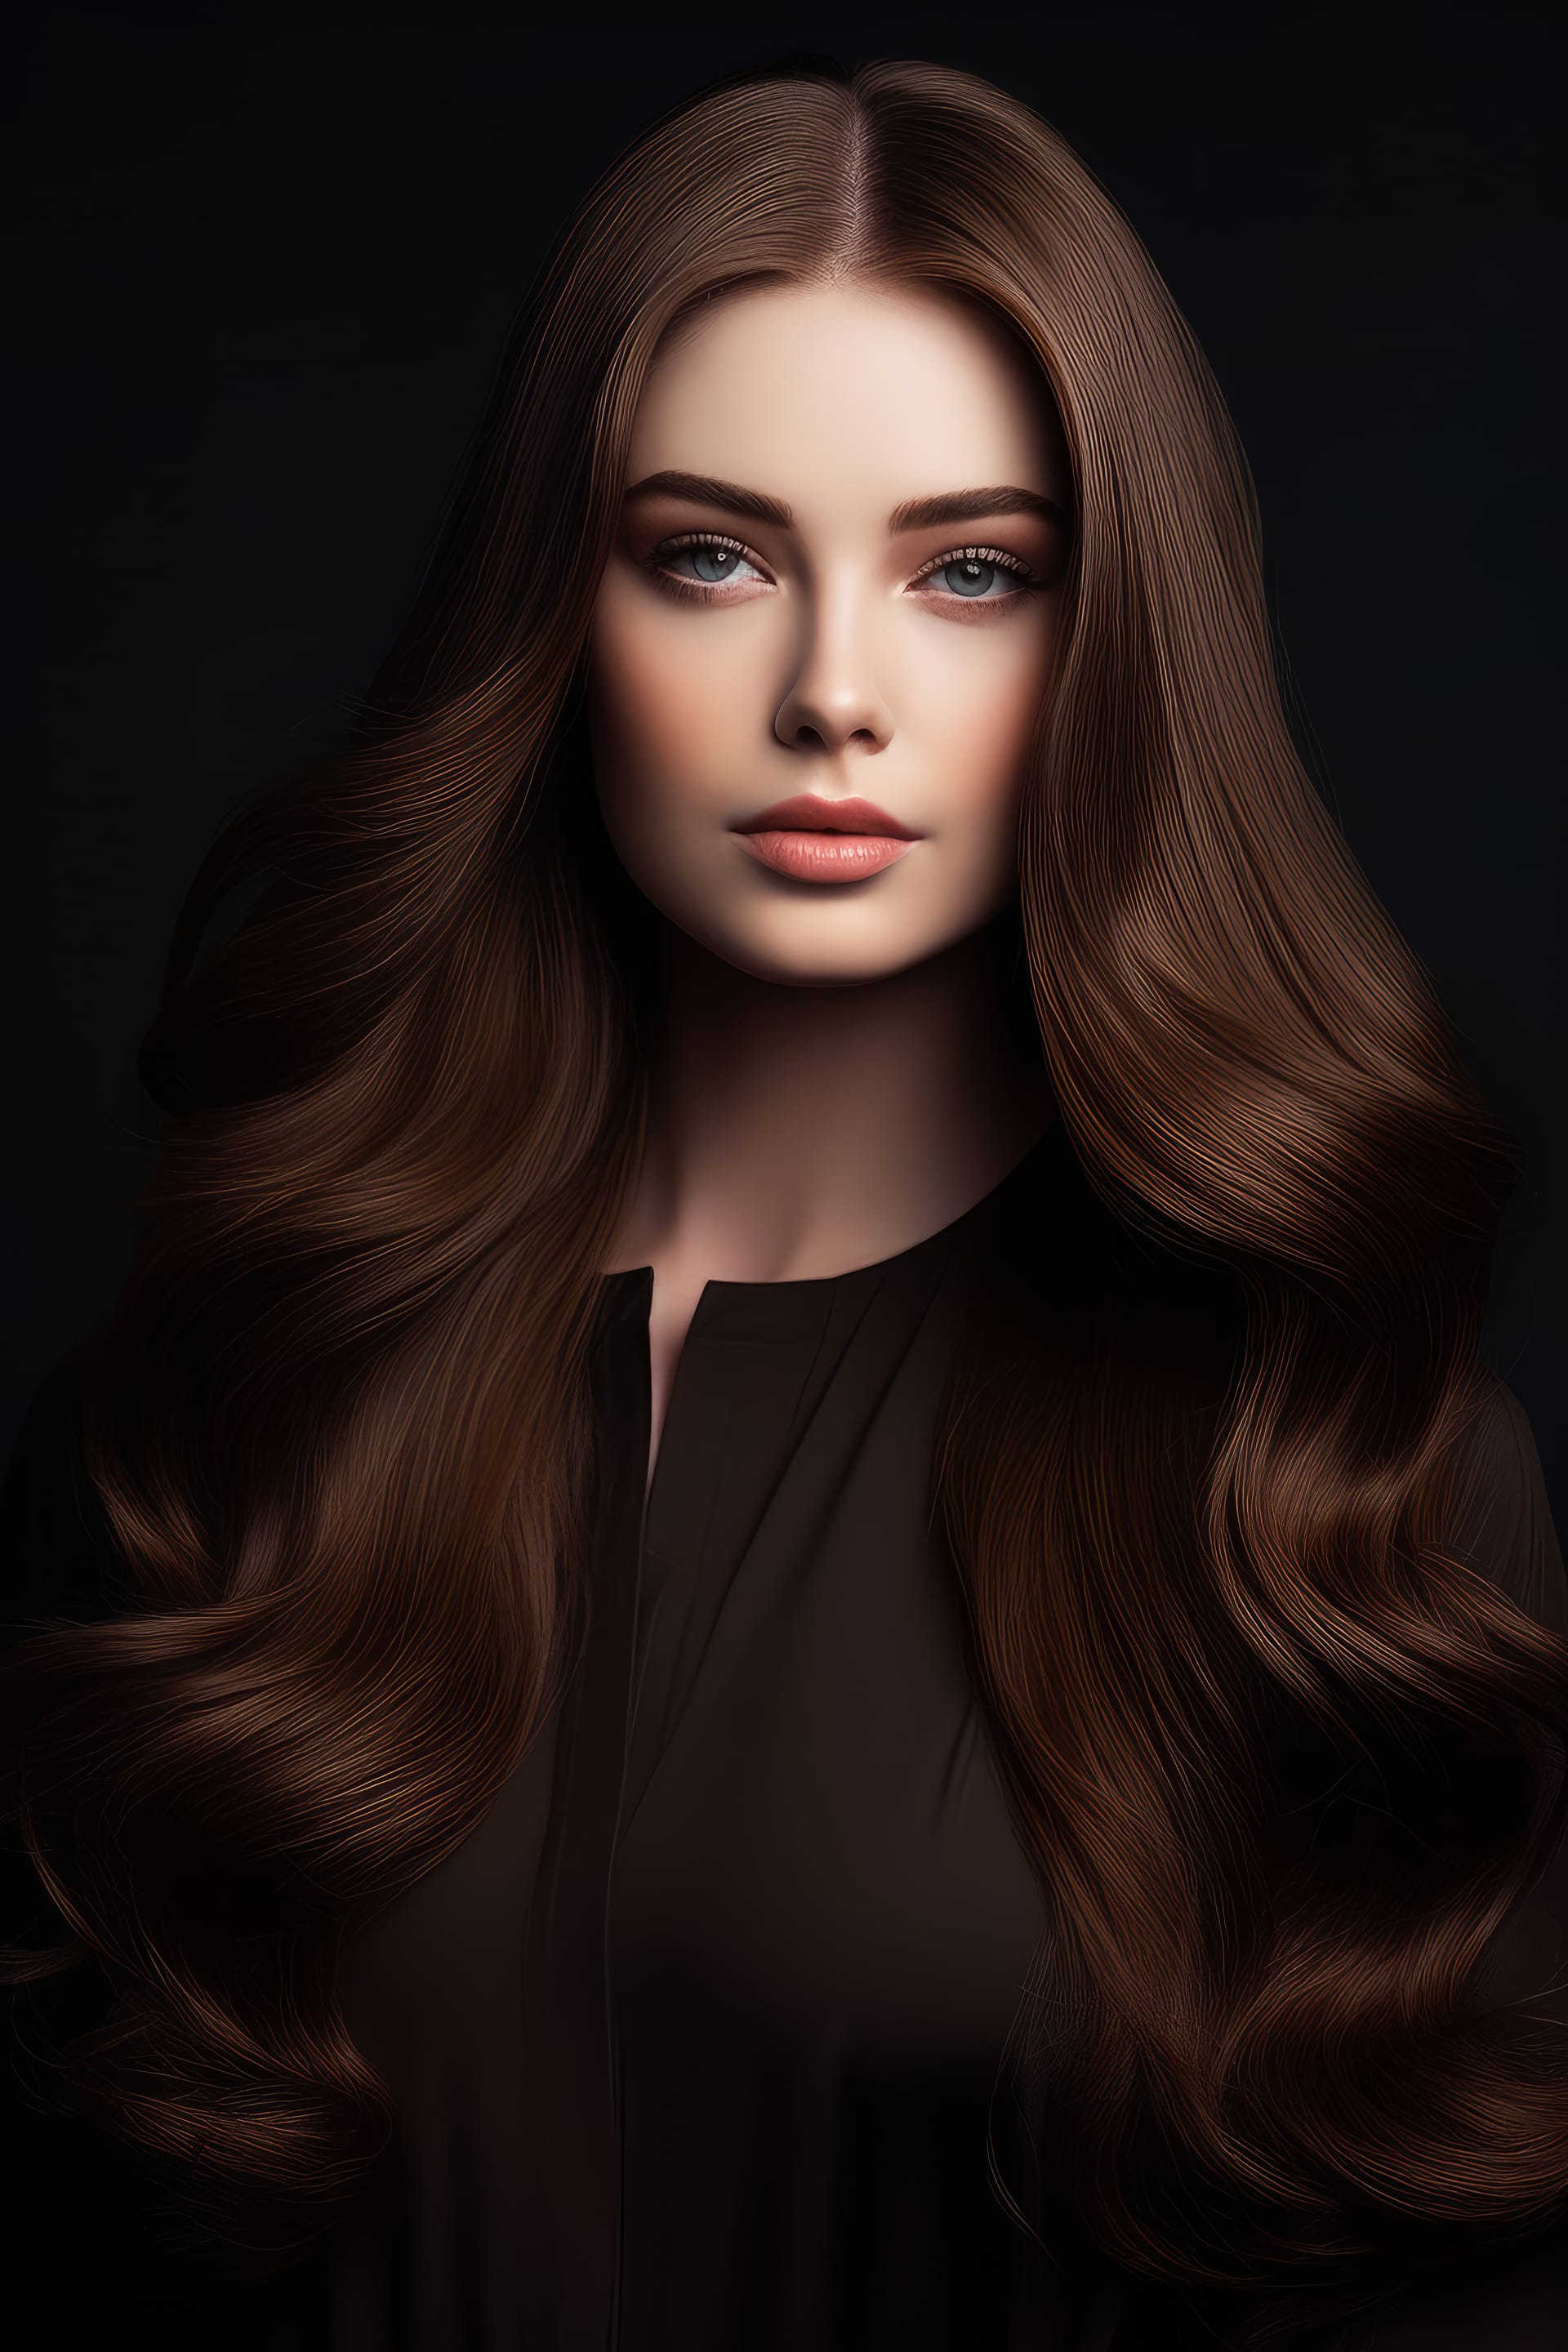 Woman with long brown hair blue eyes stands front black background